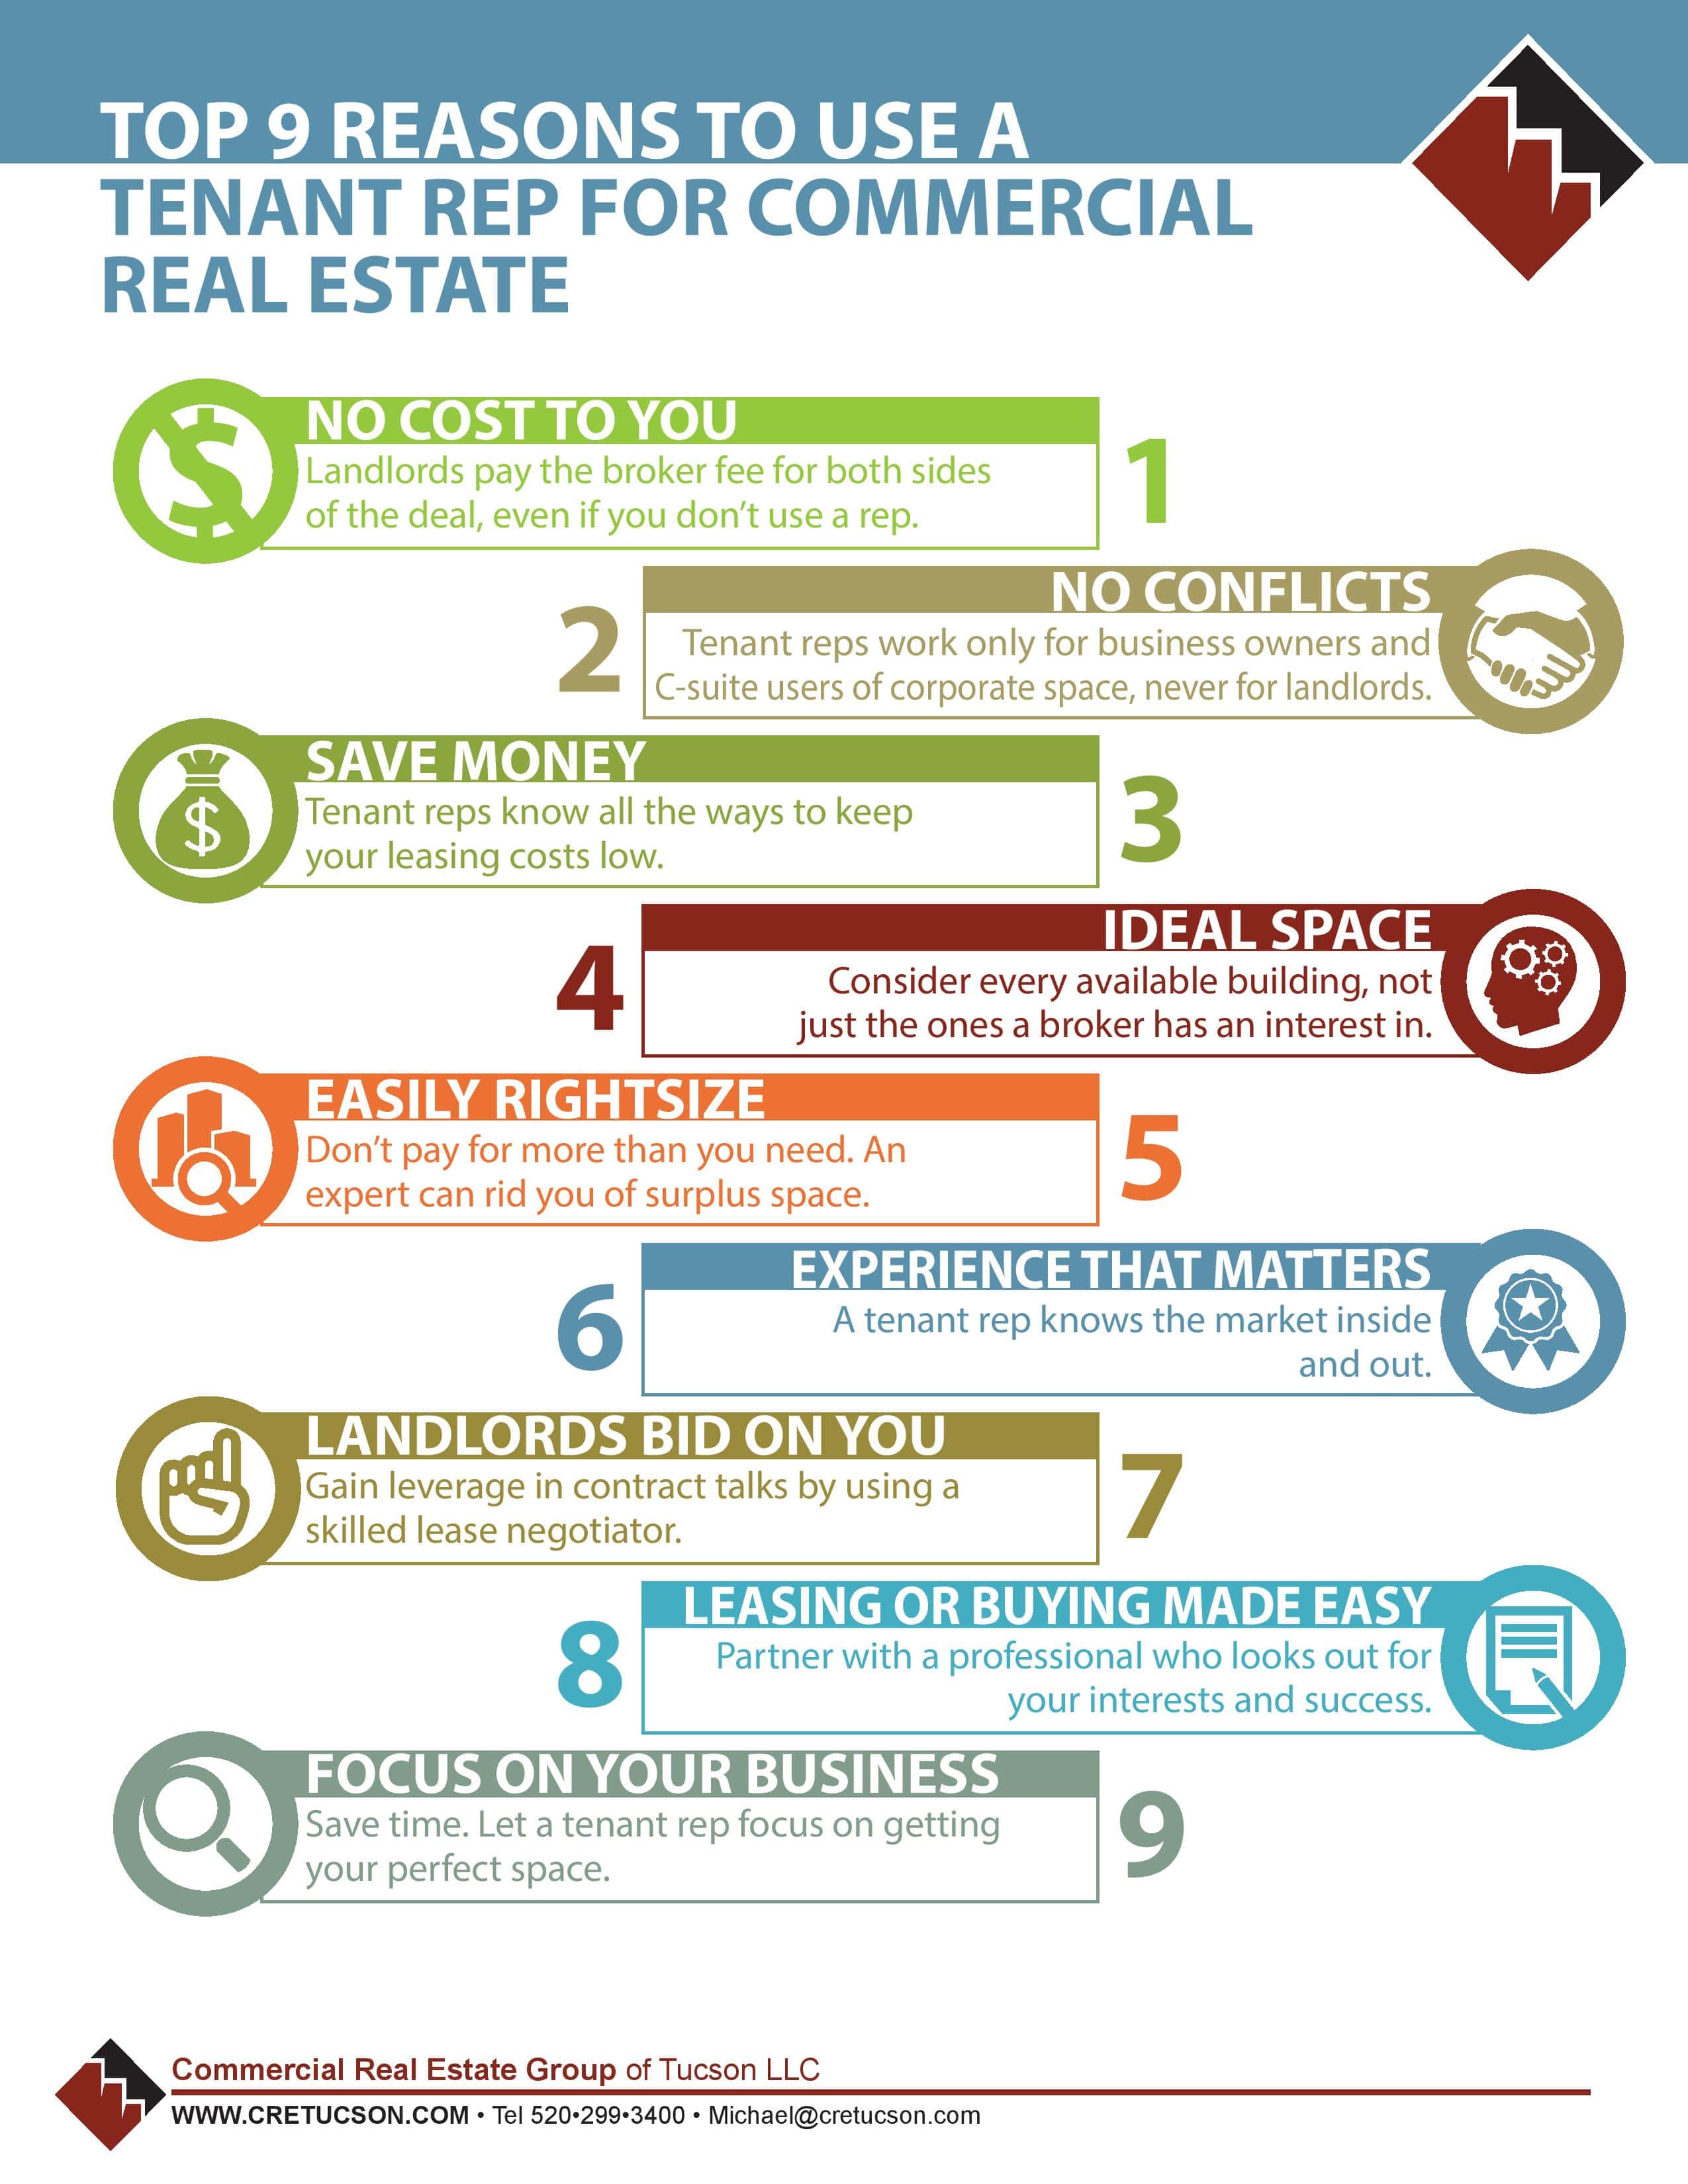 Top 9 Reasons to Use a Tenant Rep for Commercial Real Estate